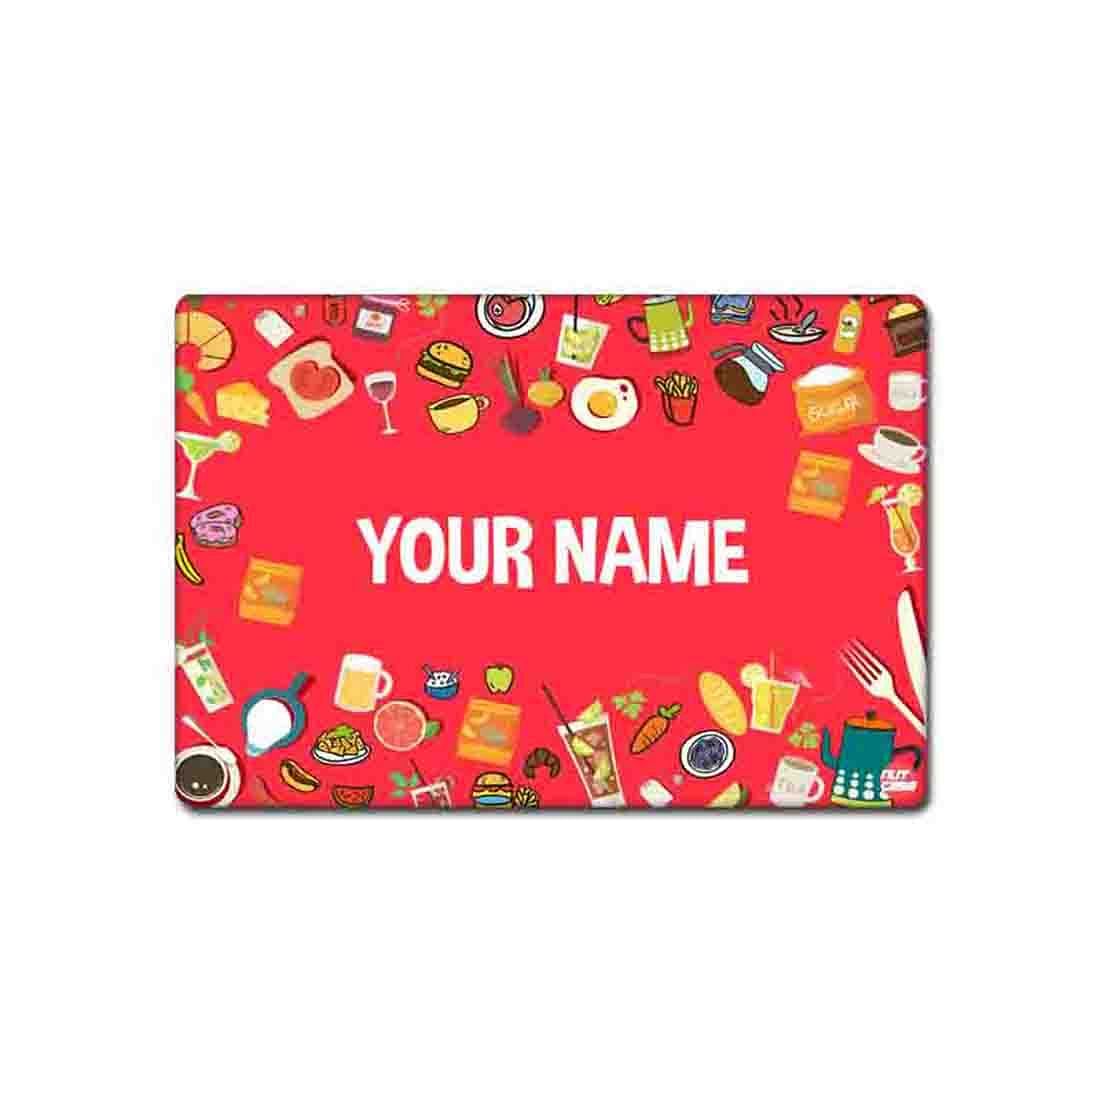 Placemats Personalised for Dining Table Unique Birthday Return Gift Ideas - Snacks Nutcase